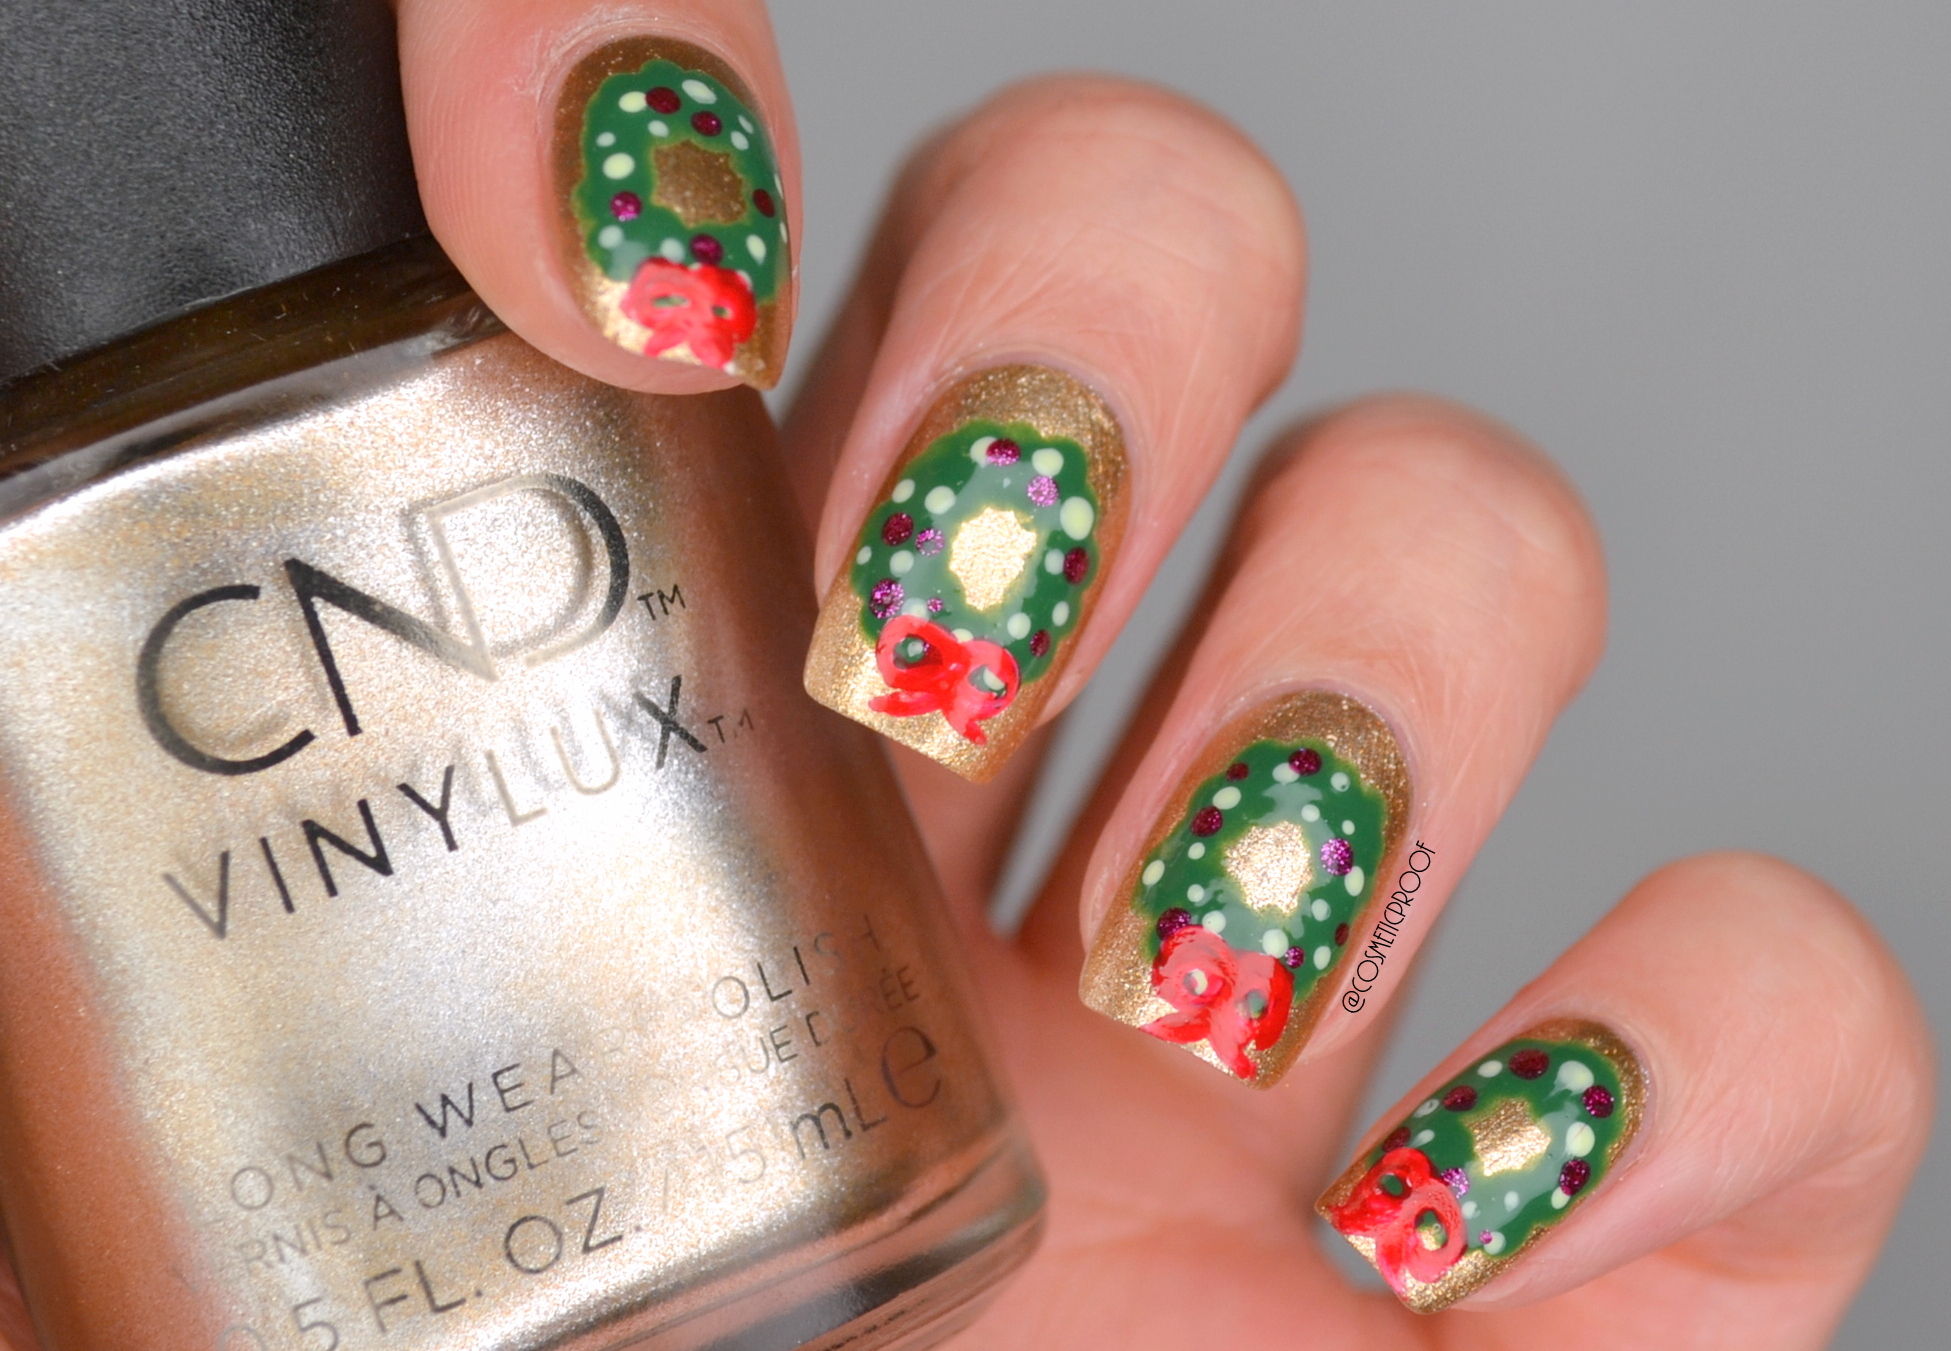 1. "Festive Christmas Nail Art Ideas for a Cool Holiday Look" - wide 2